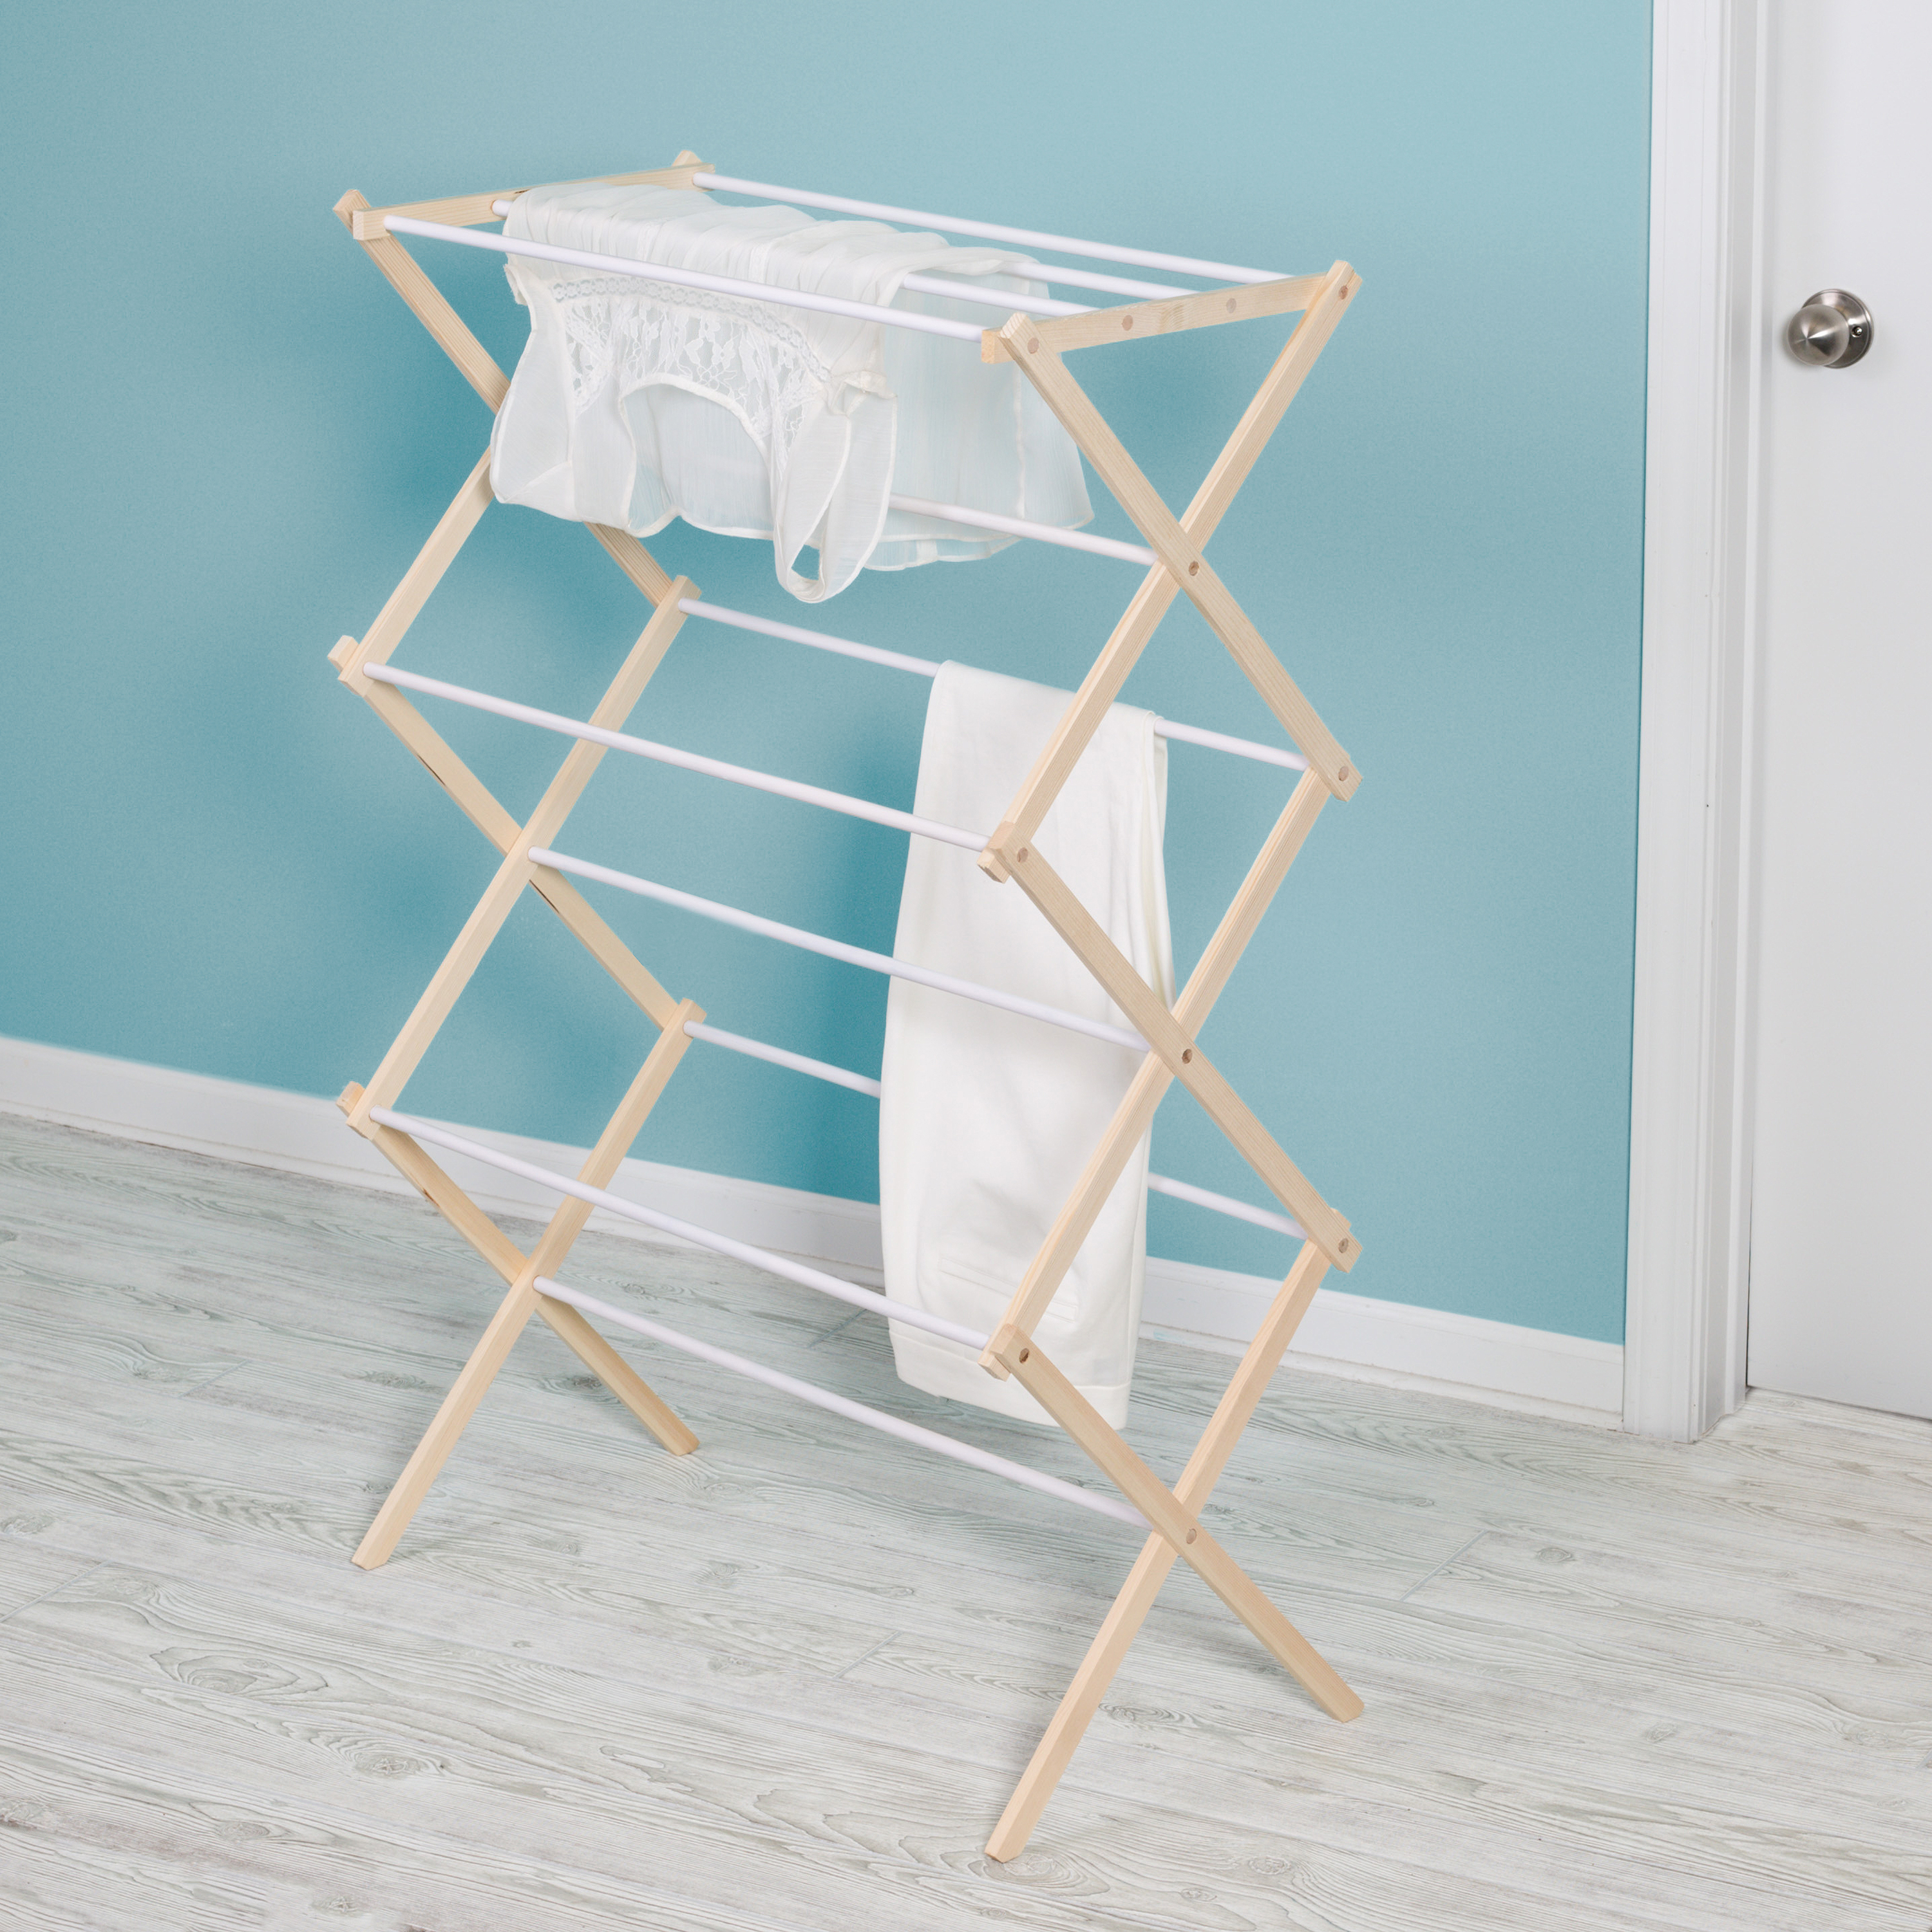 Honey Can Do Collapsible Wood Clothes Drying Rack - image 4 of 5